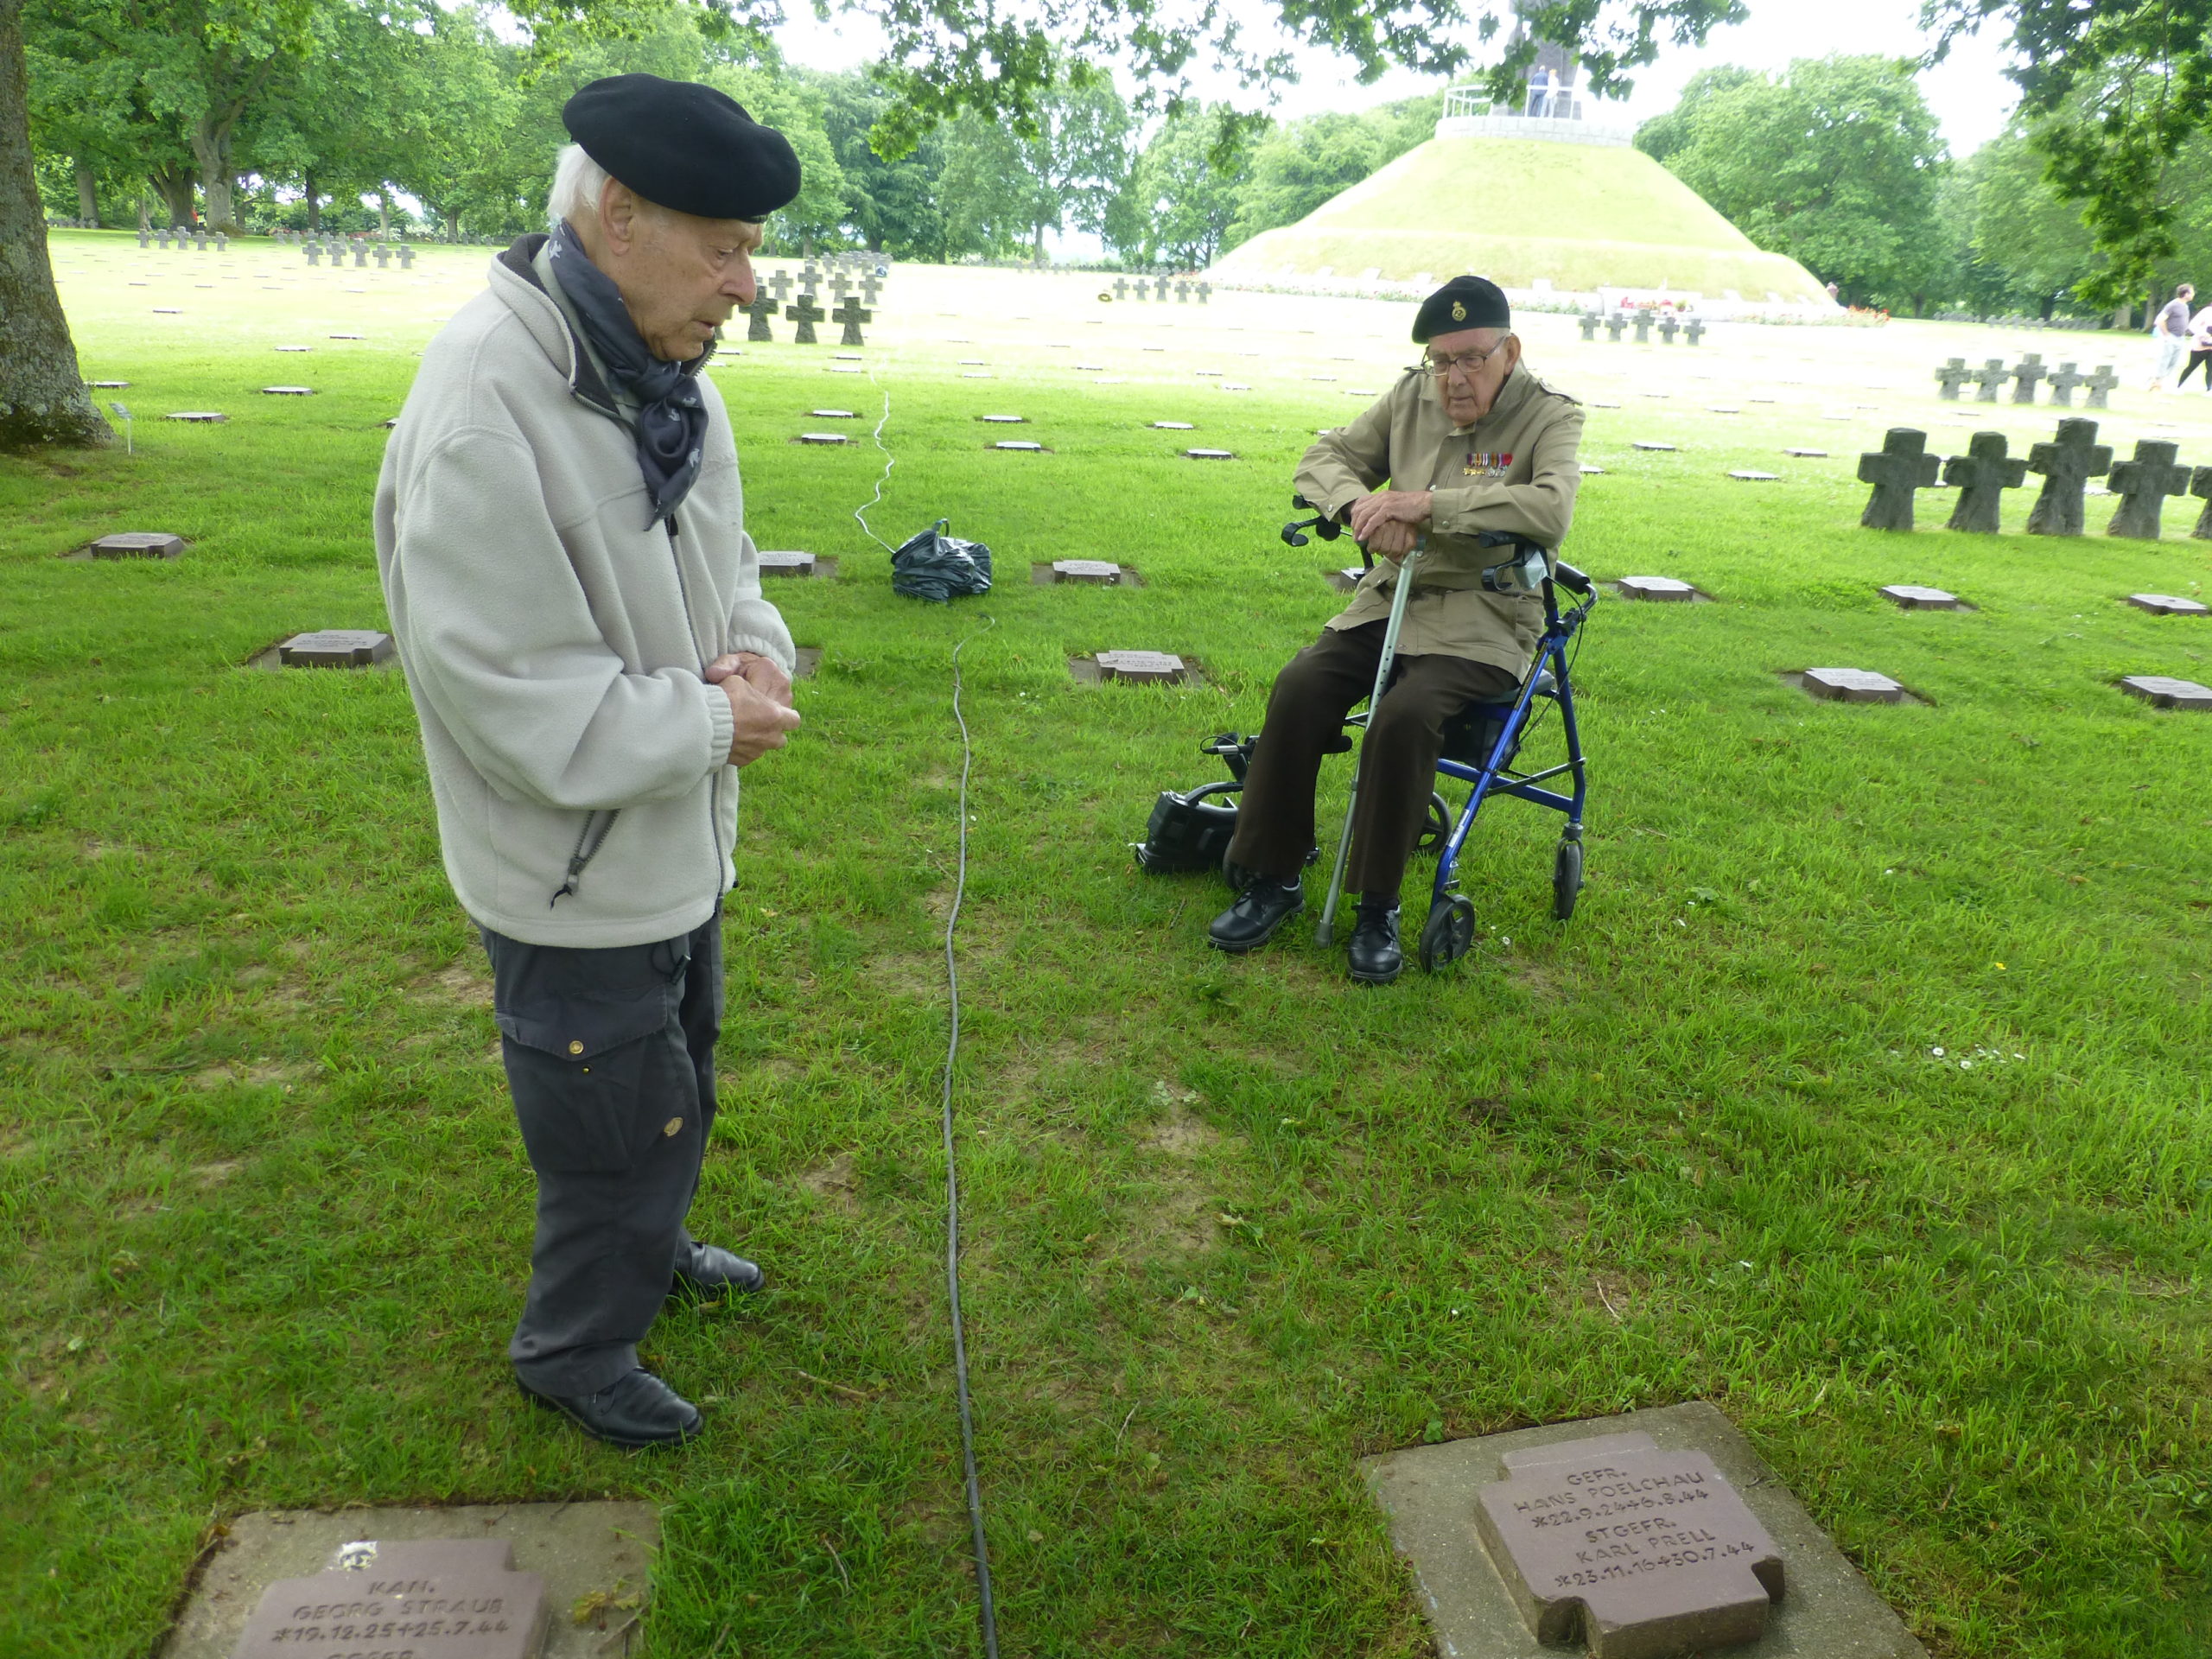 Charley and Graham at the grave of Hans Poelchau, Charley's Jewish childhood neighbor and friend, who died fighting for the Germans in Normandy in 1944